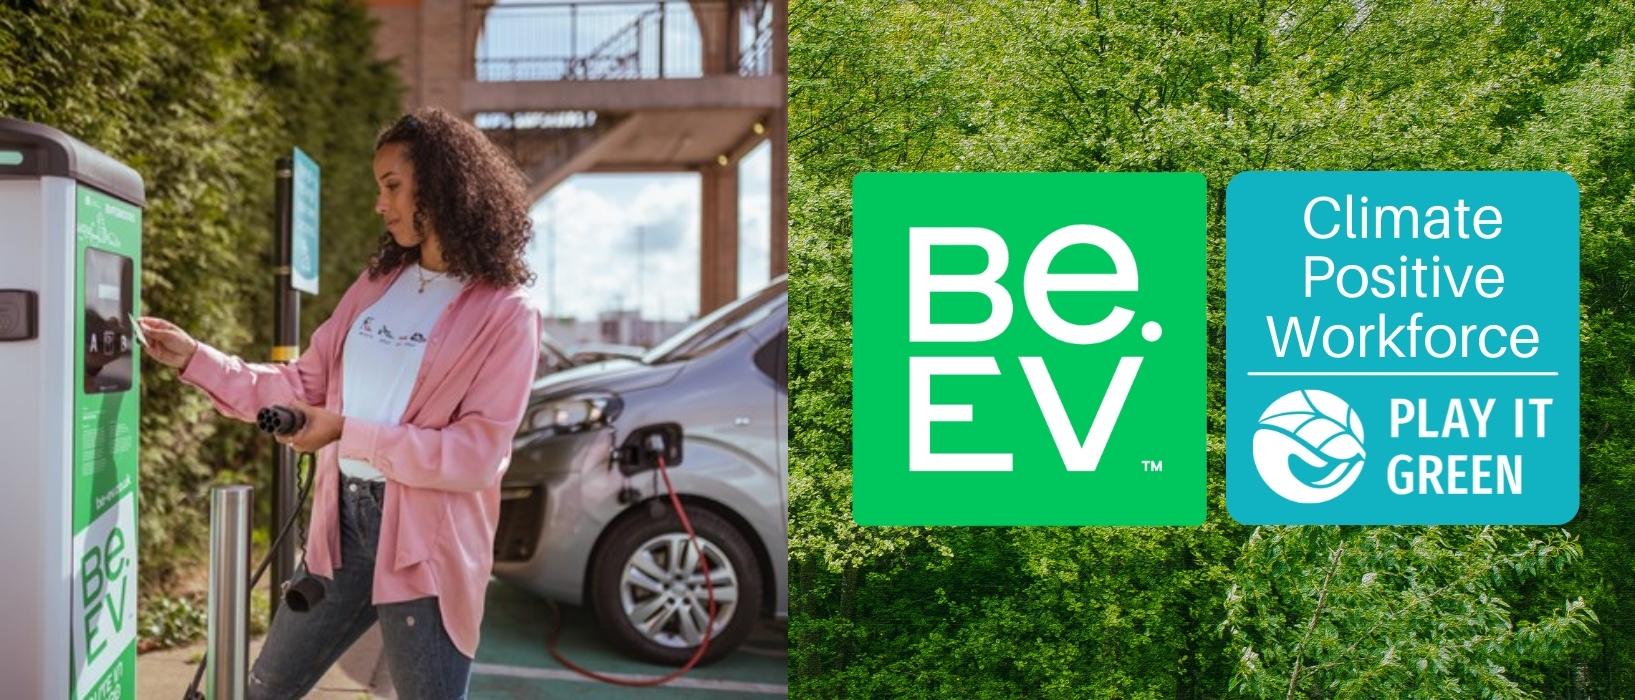 woman charging car at be.ev electric vehicle charging point